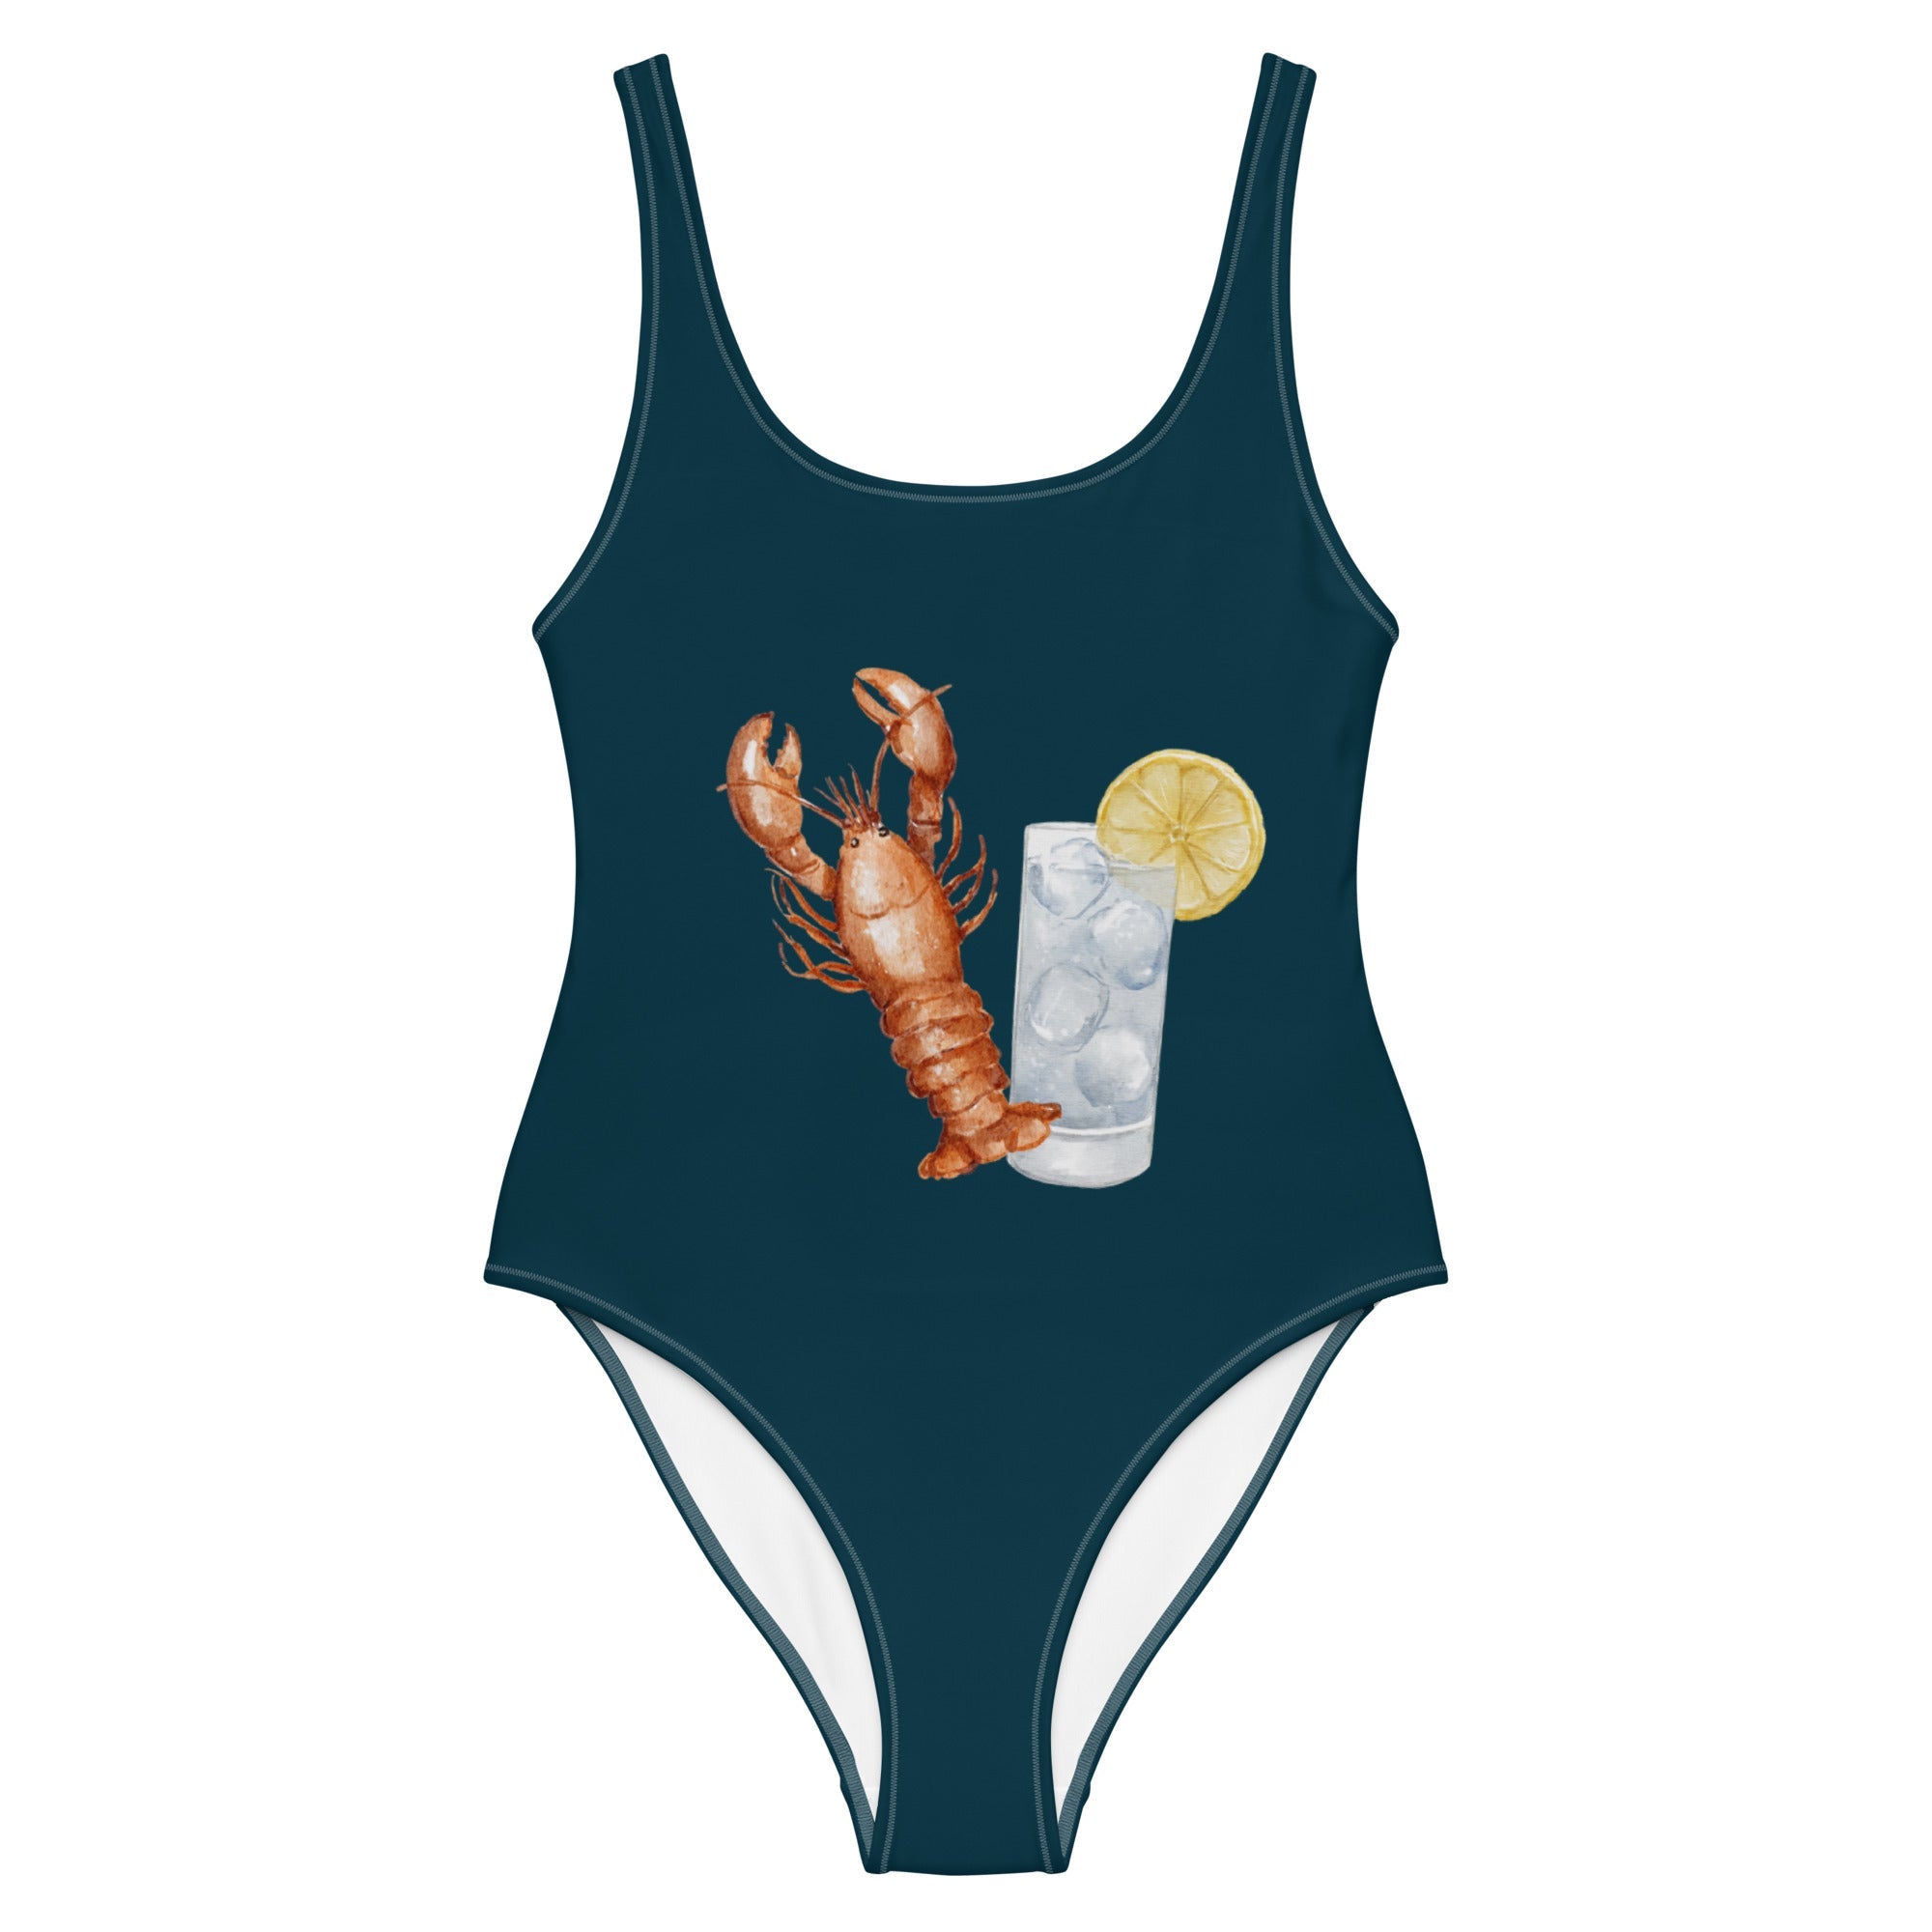 Lobster & GT - Swimsuit - The Refined Spirit